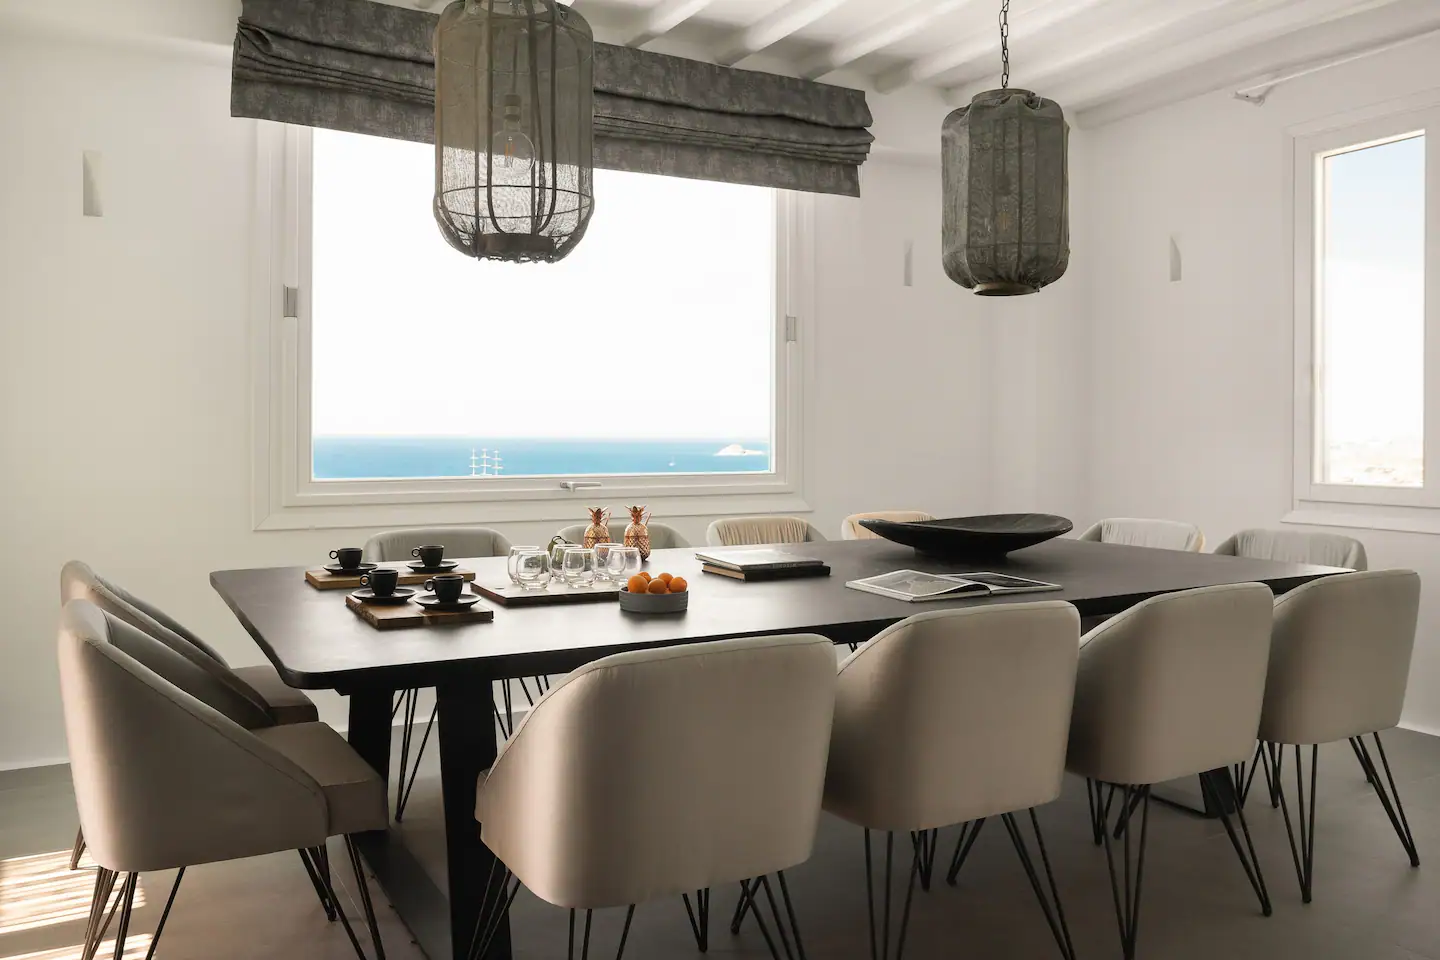 Stylish and sophisticated dining space.